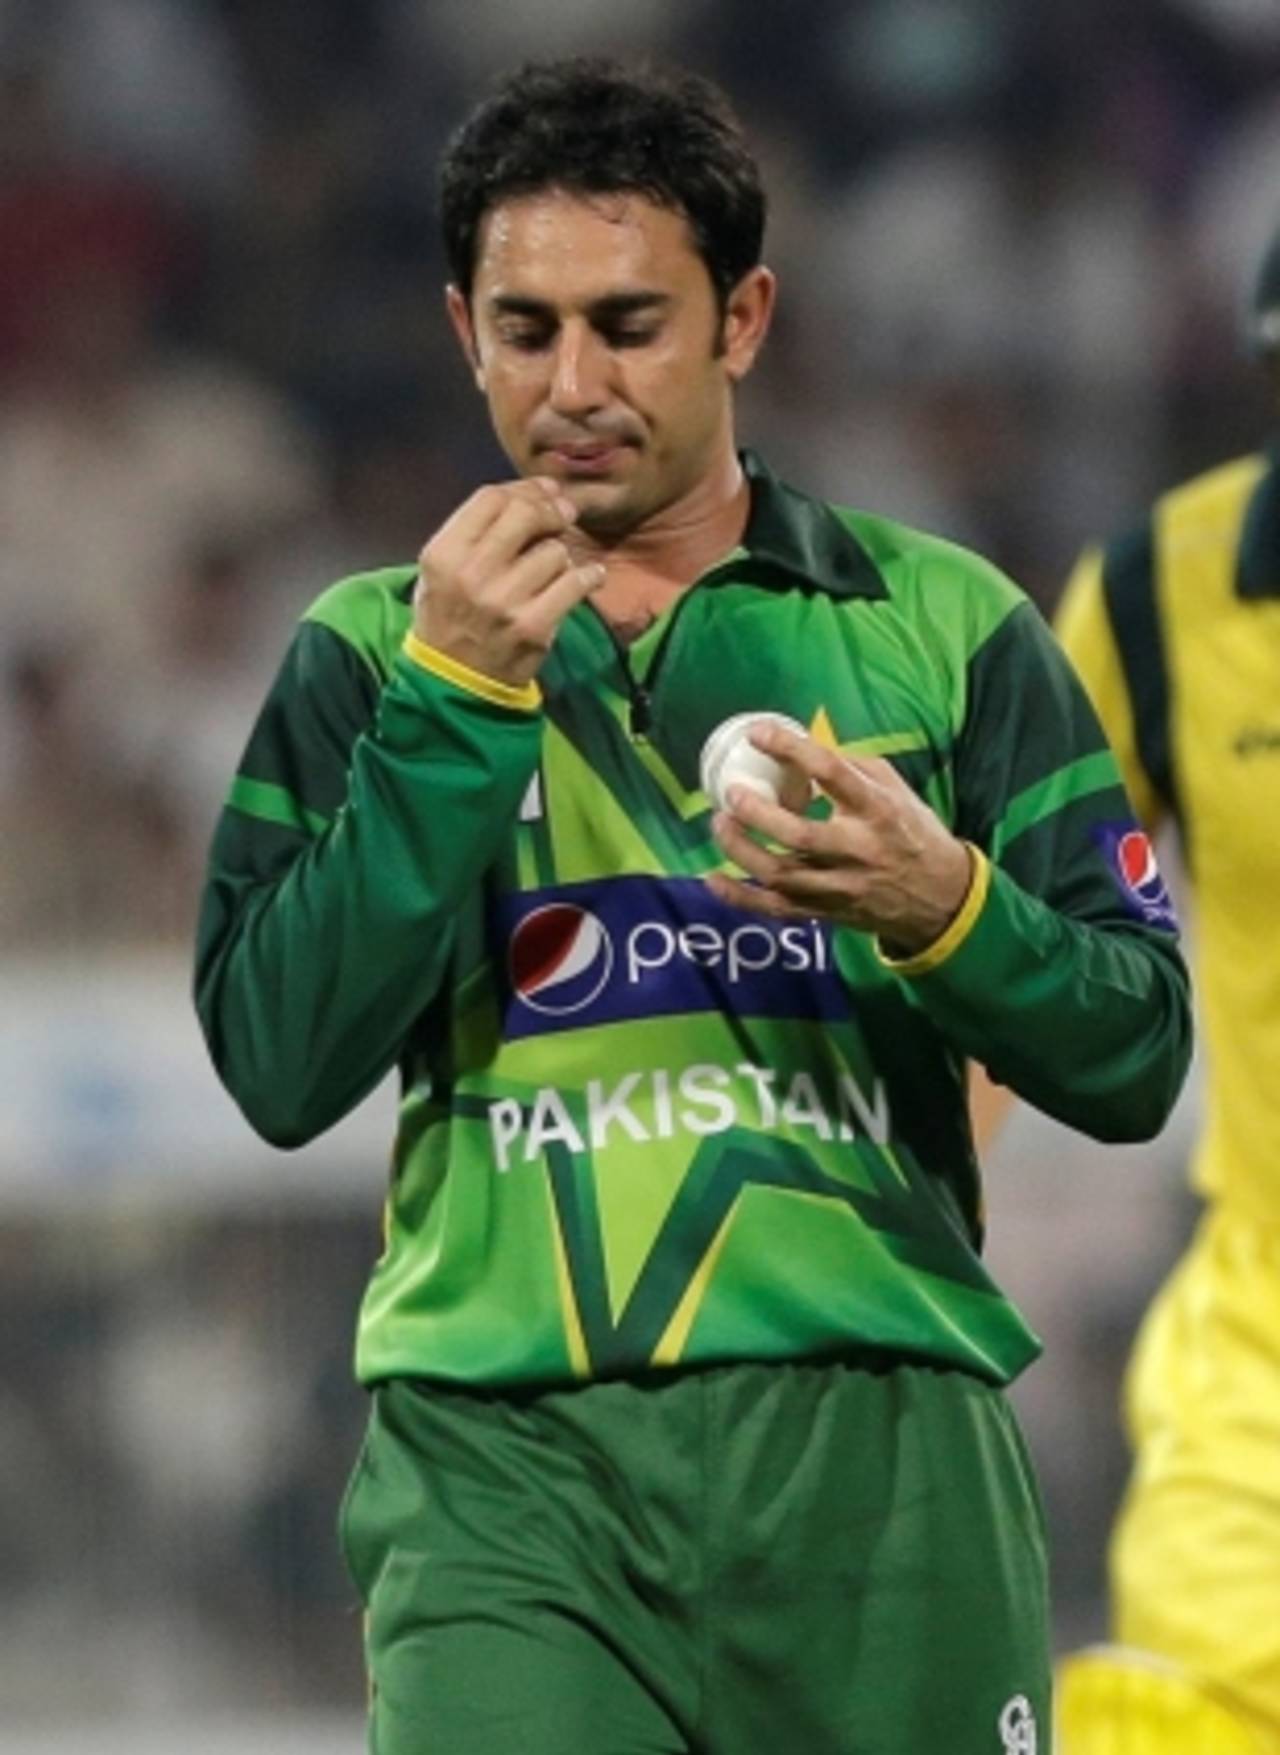 As part of his act aimed at getting onto the ICC shortlist, Saeed Ajmal pulls a ball out of his throat on an invisible piece of string&nbsp;&nbsp;&bull;&nbsp;&nbsp;Associated Press